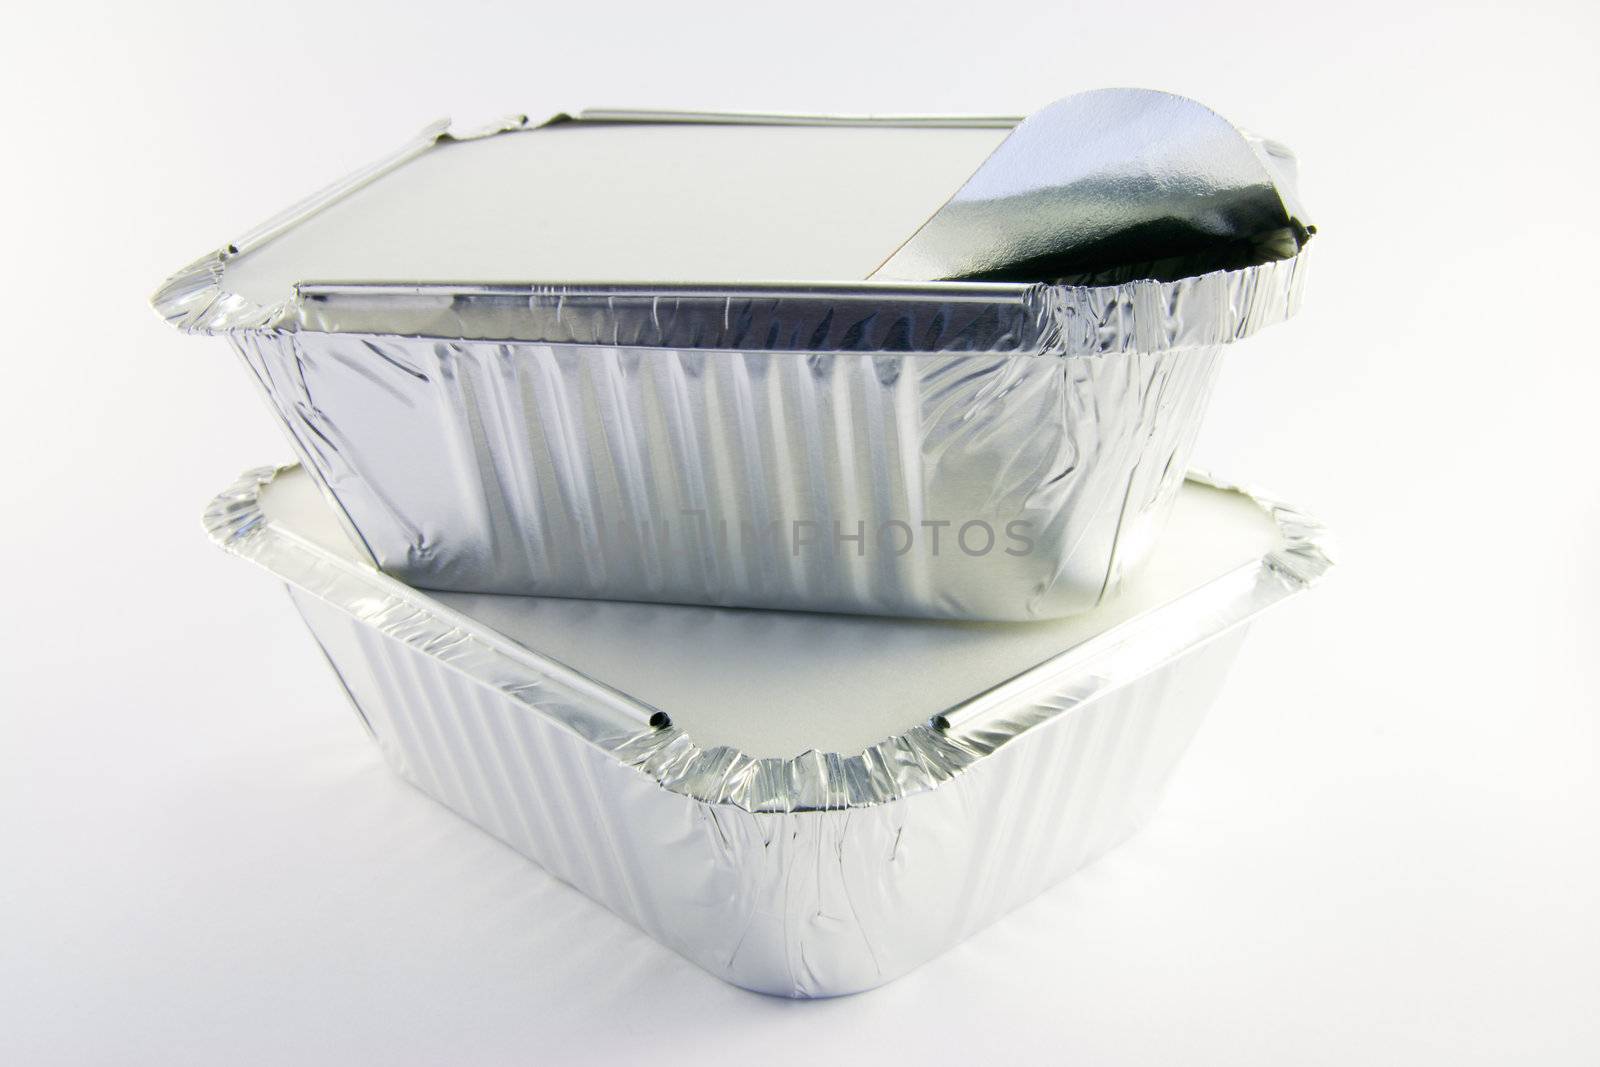 2 square foil catering trays 1 partly opened